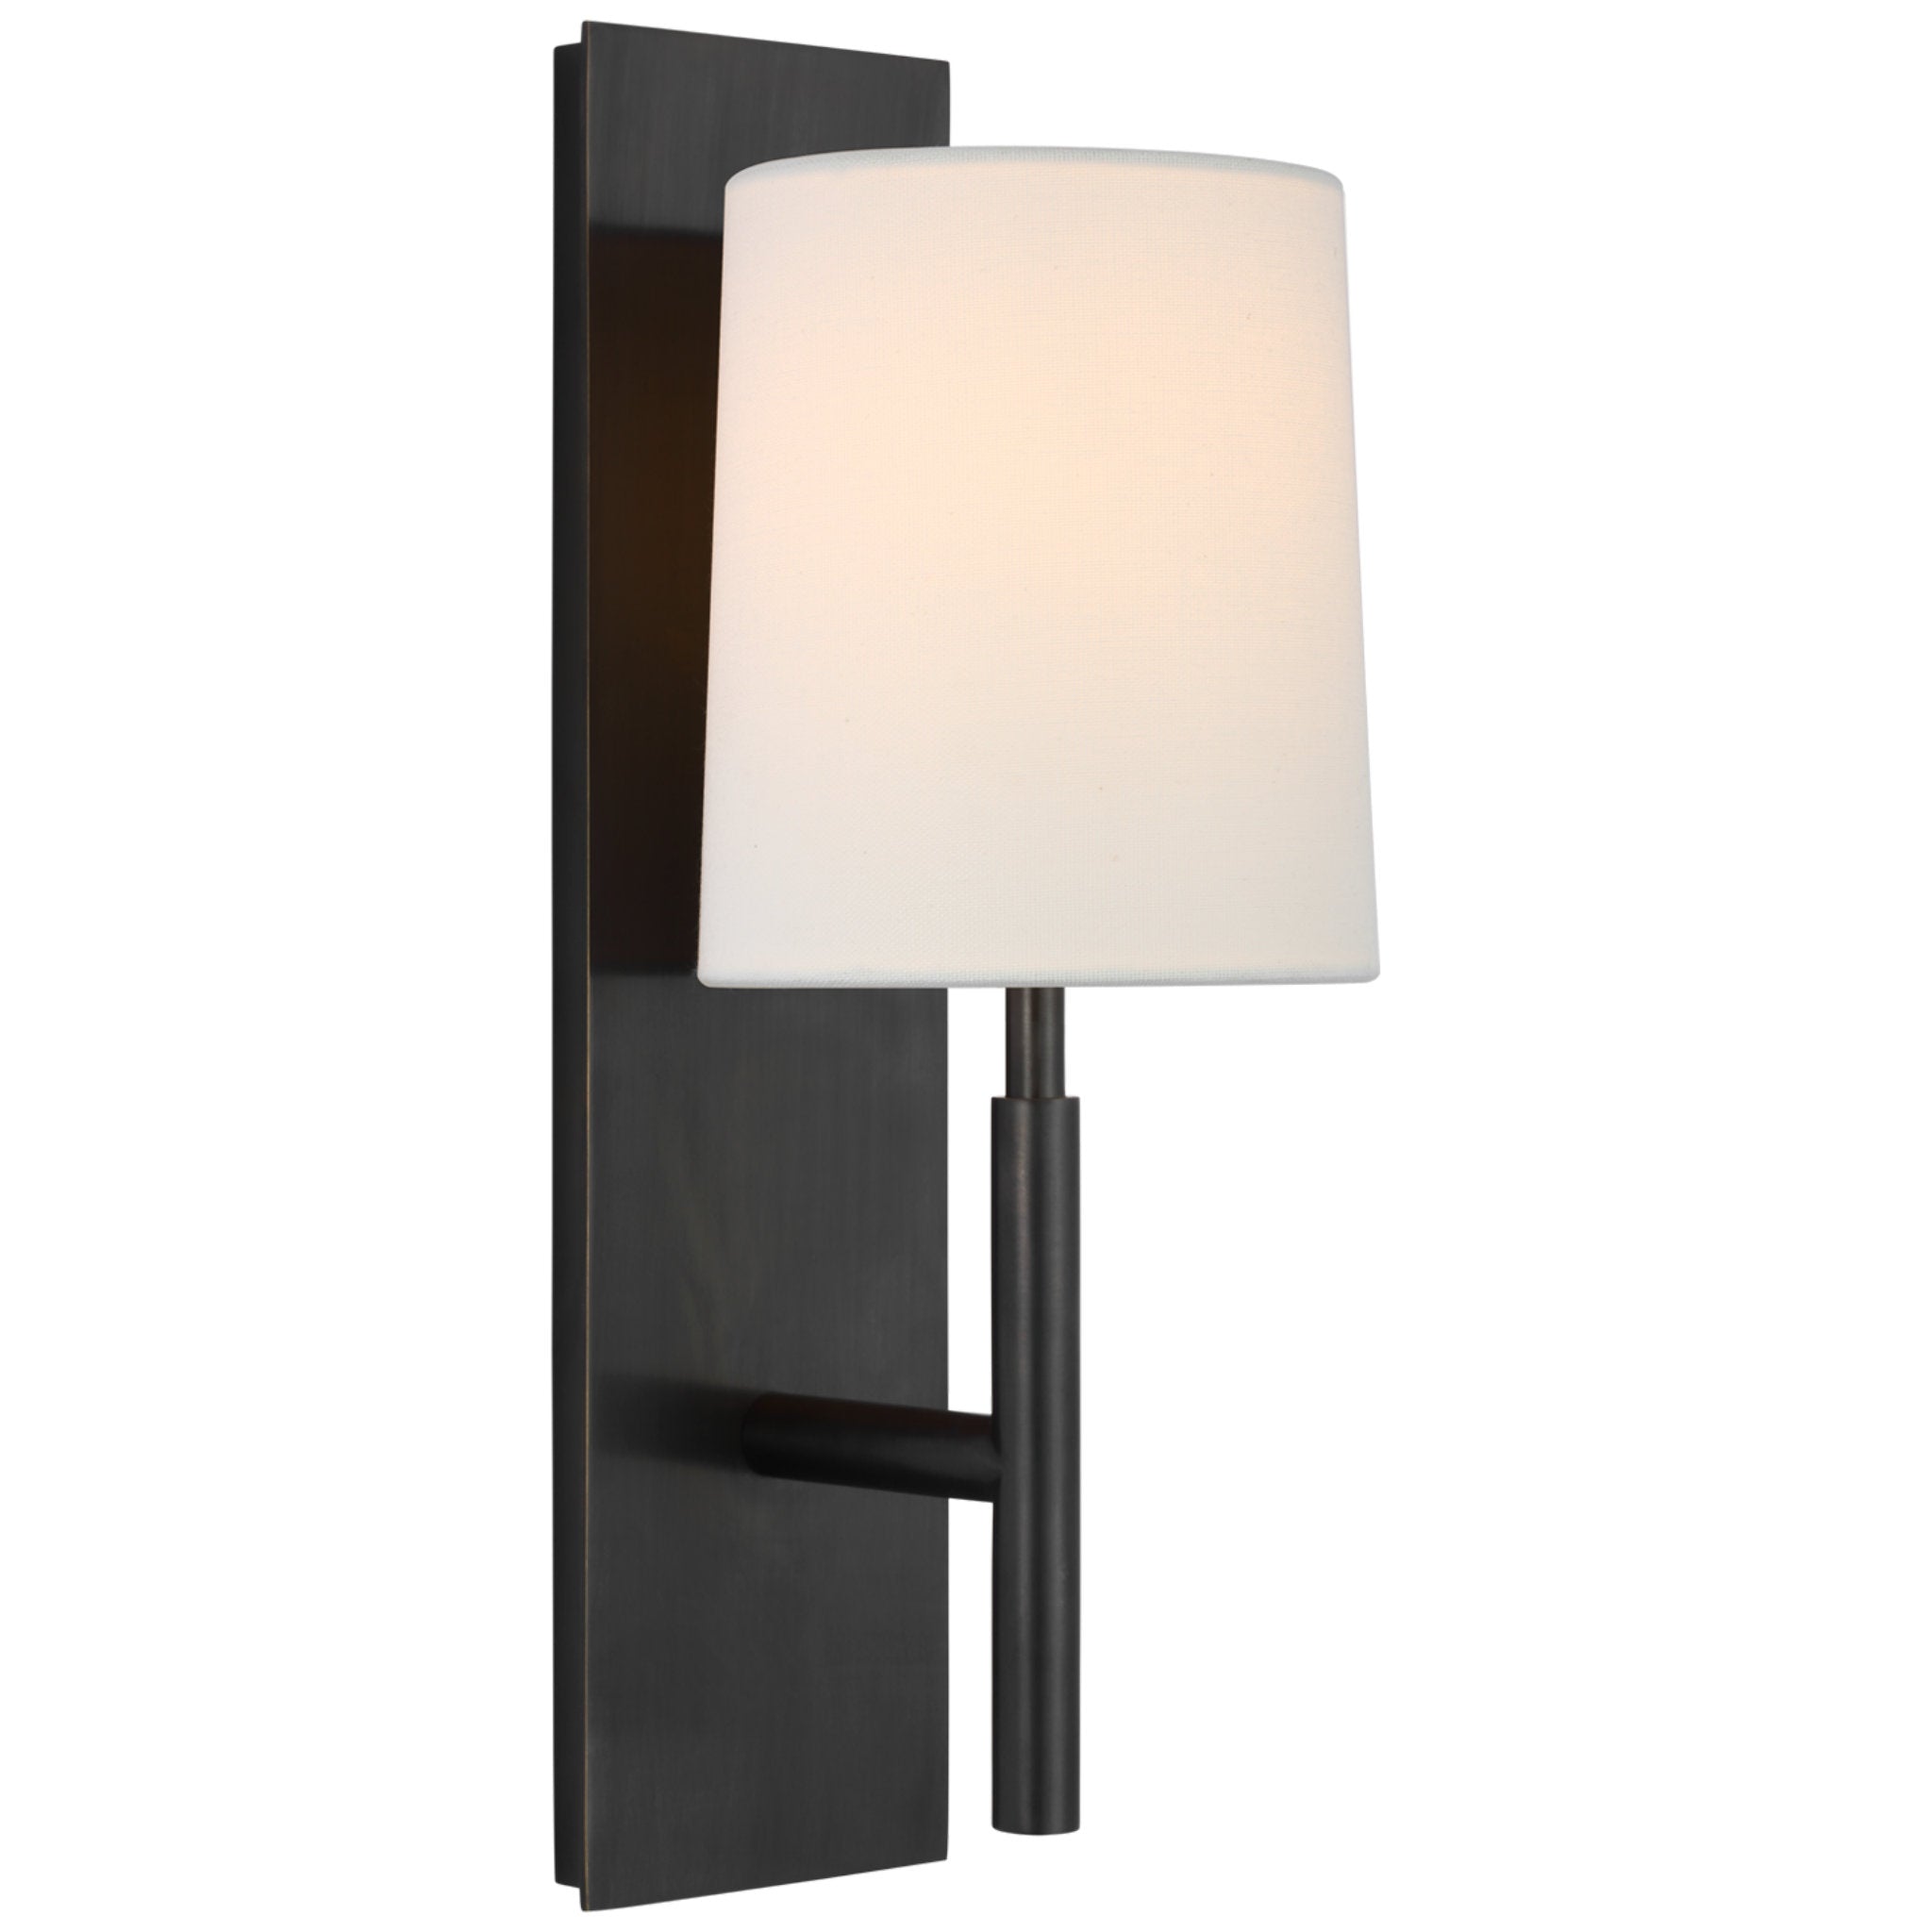 Barbara Barry Clarion Medium Sconce in Bronze with Linen Shade